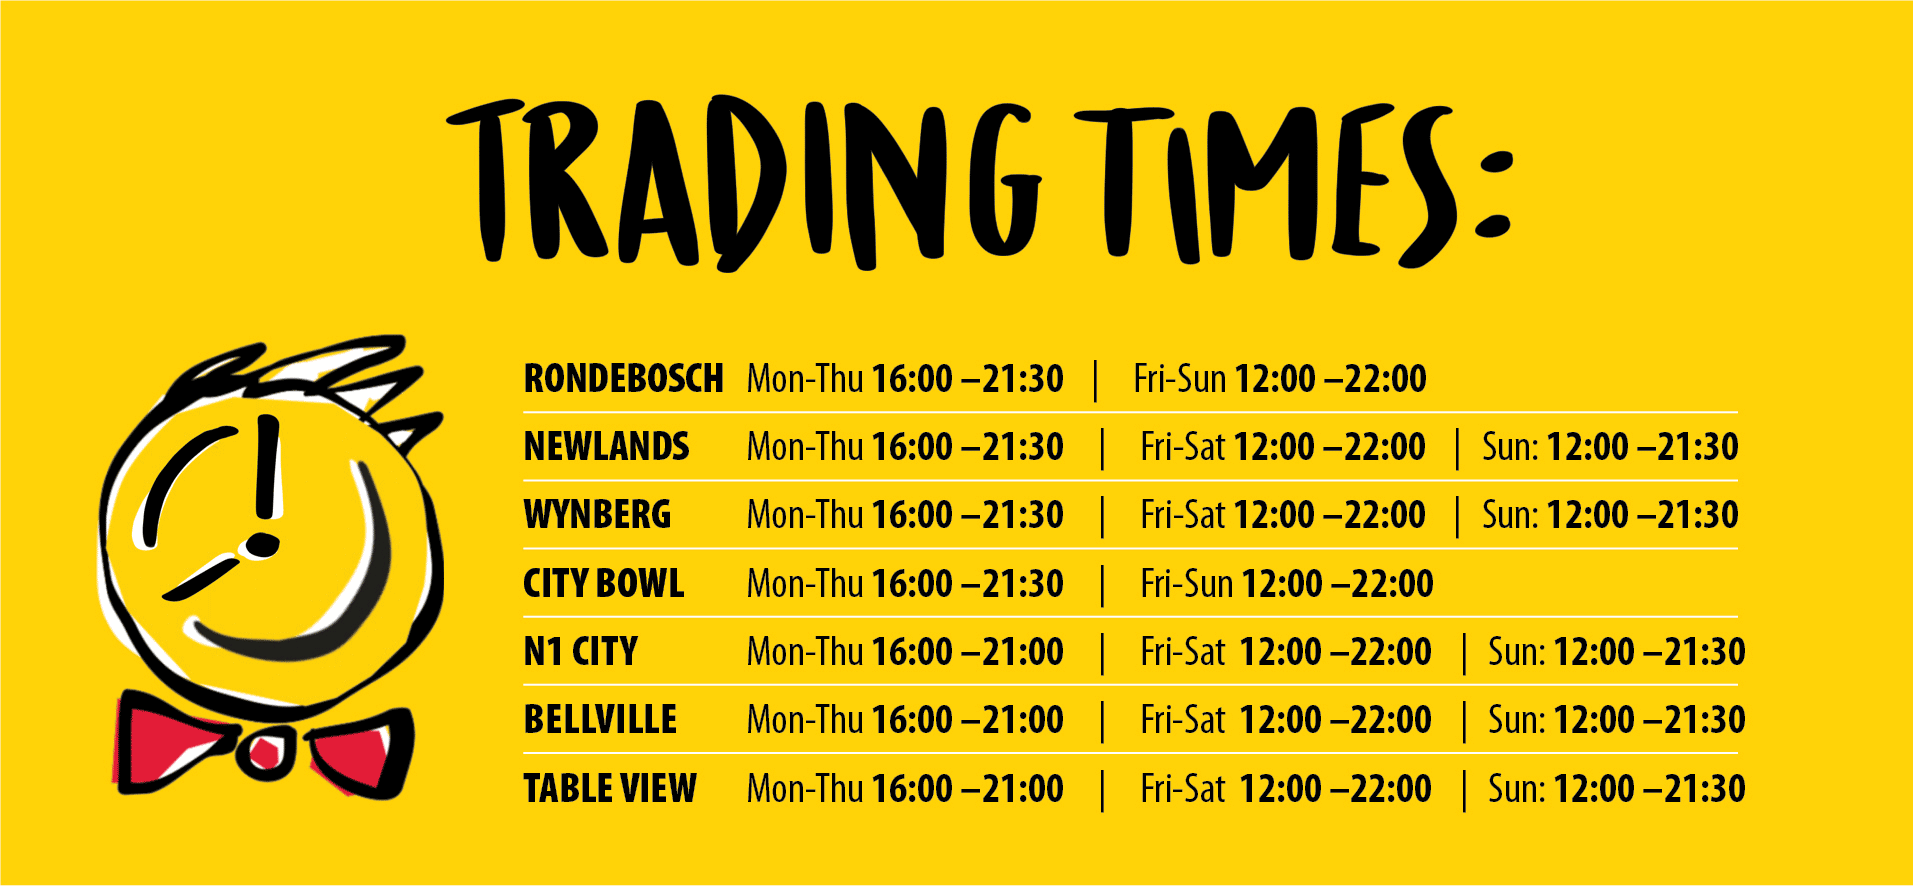 Butler's Pizza - Level 1 Trading Times